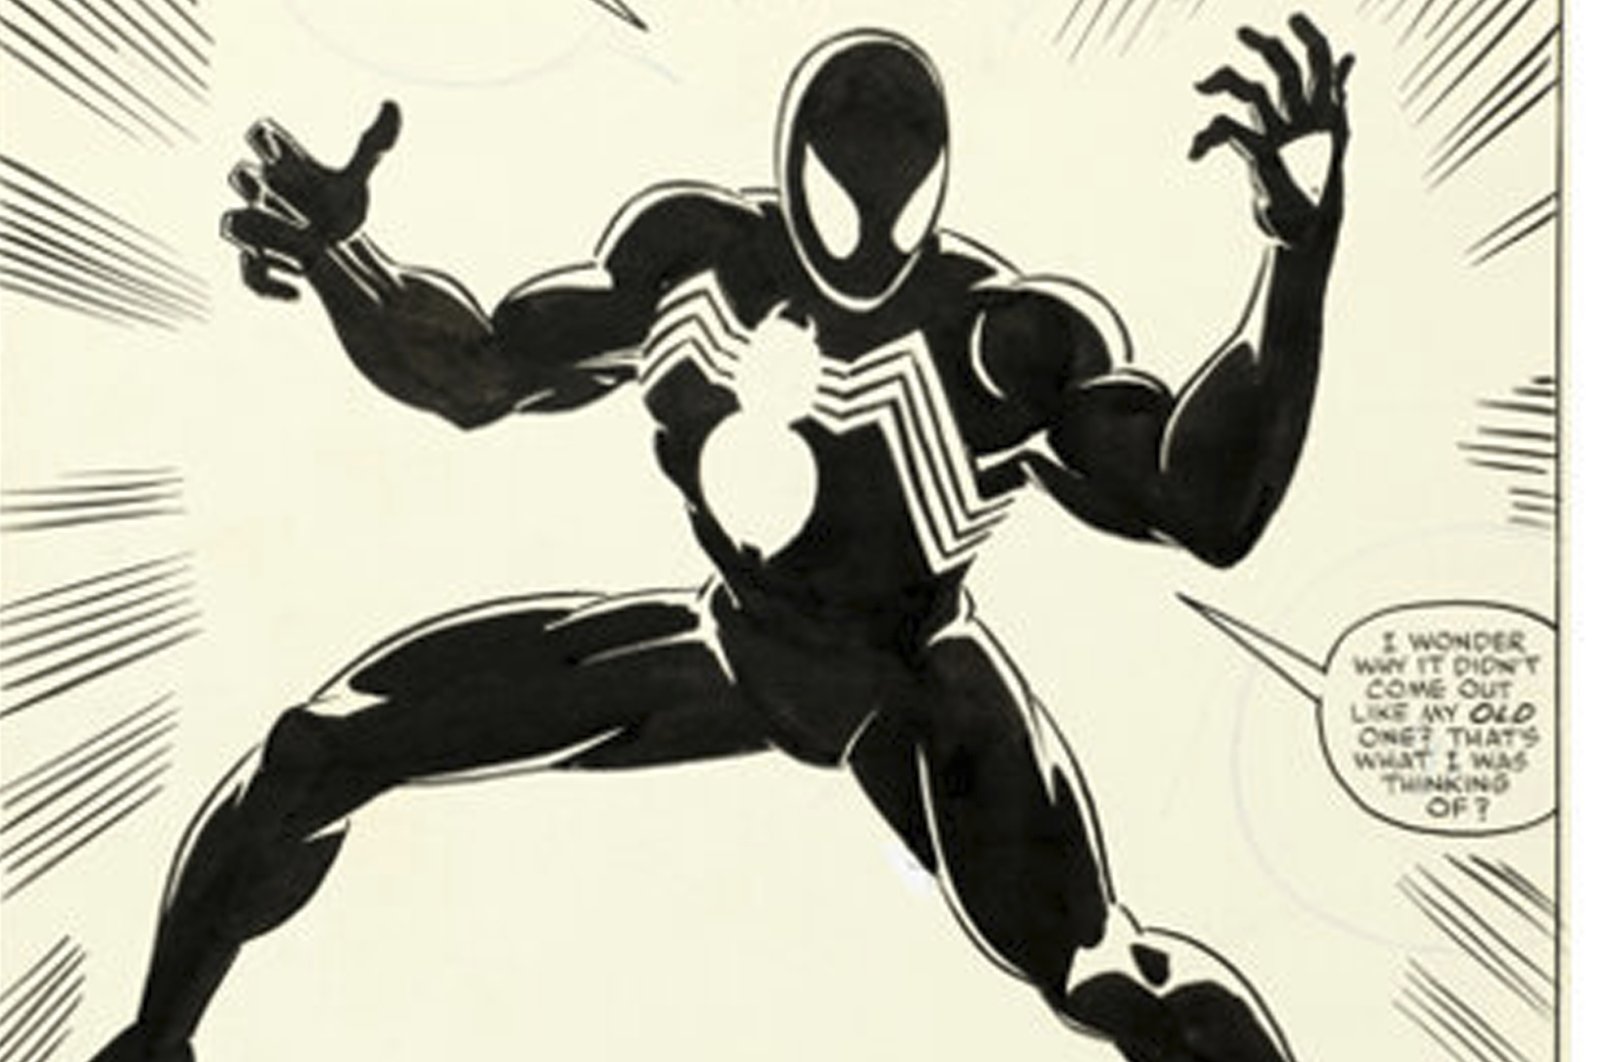 This image provided by Heritage Auctions shows Page 25 from the 1984 Marvel comic Secret Wars No. 8, which tells the origin story of Spider-Man&#039;s now-iconic black costume. (Heritage Auctions via AP)